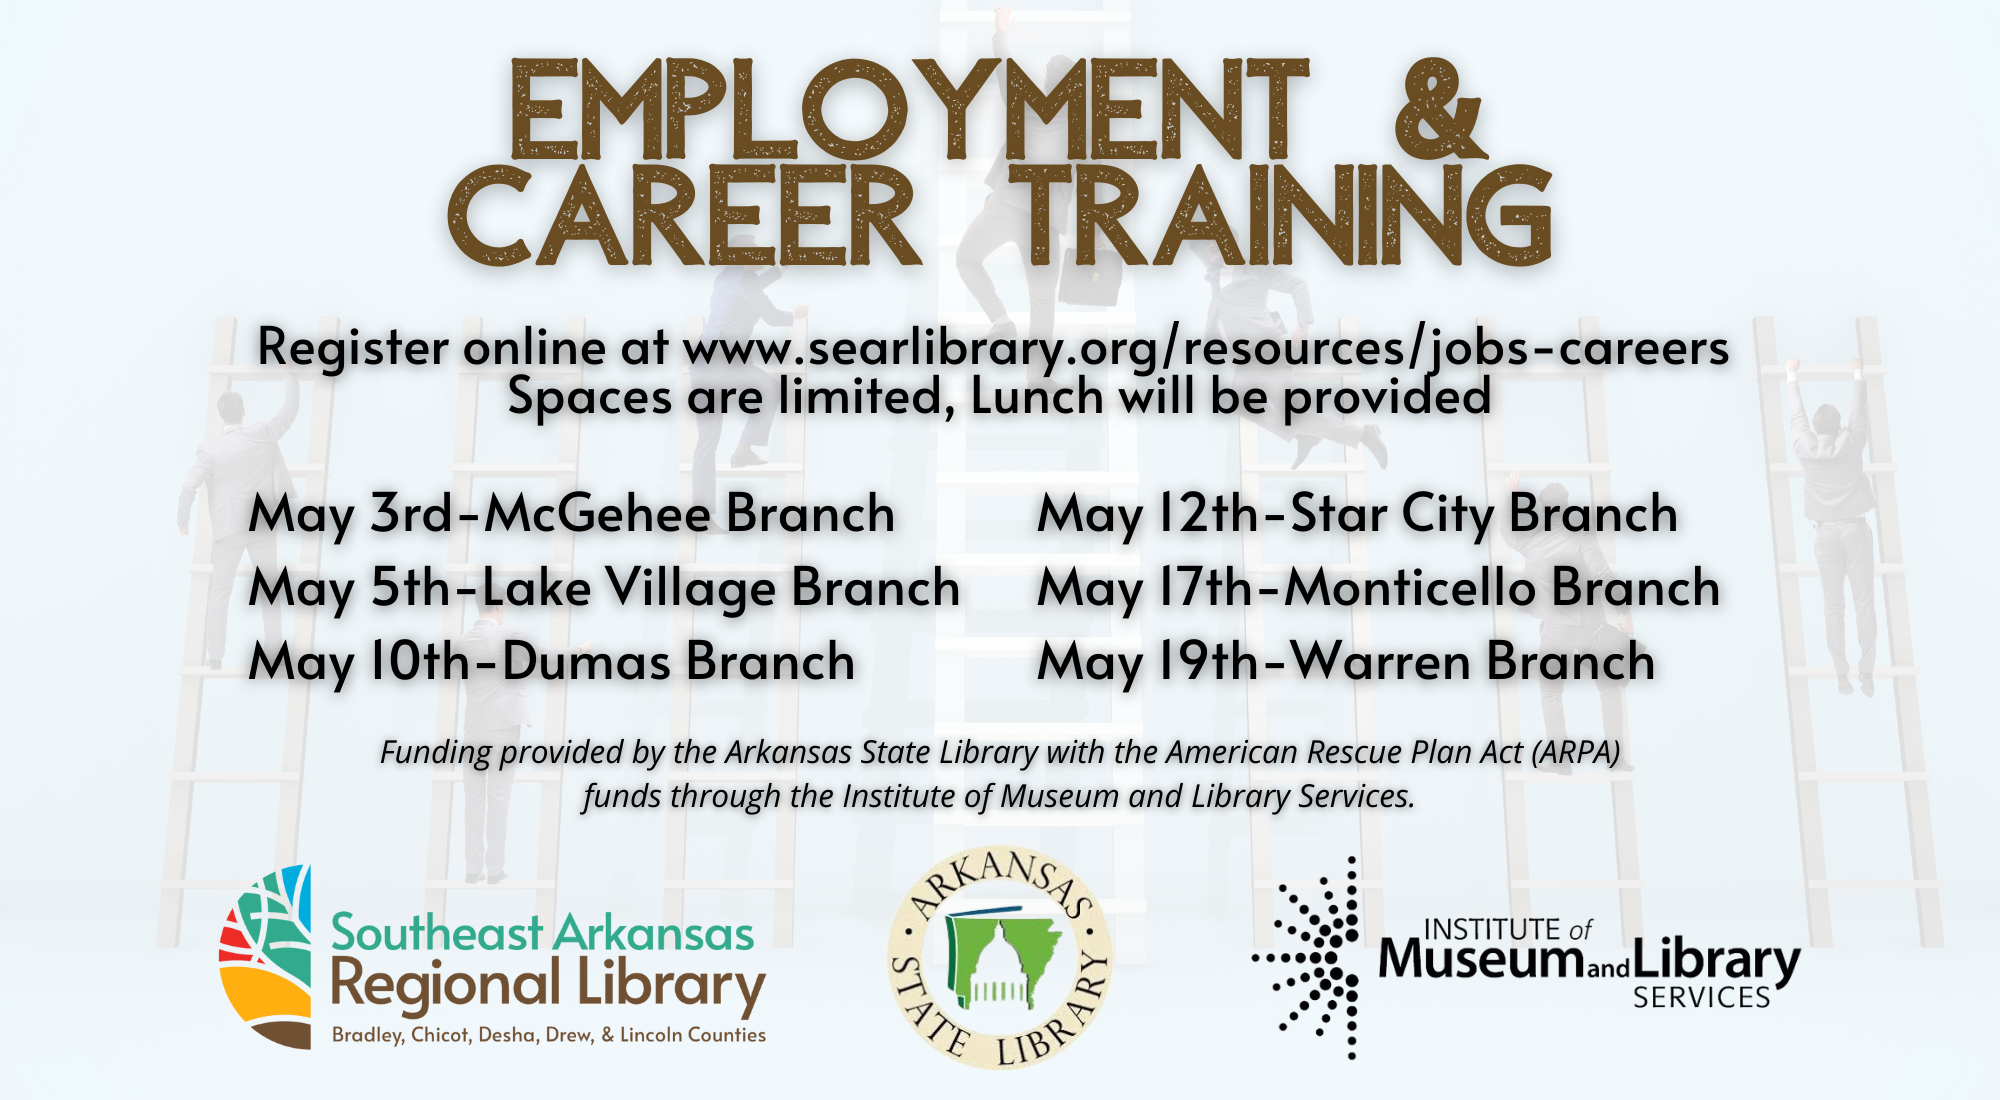 Image of flyer for job training